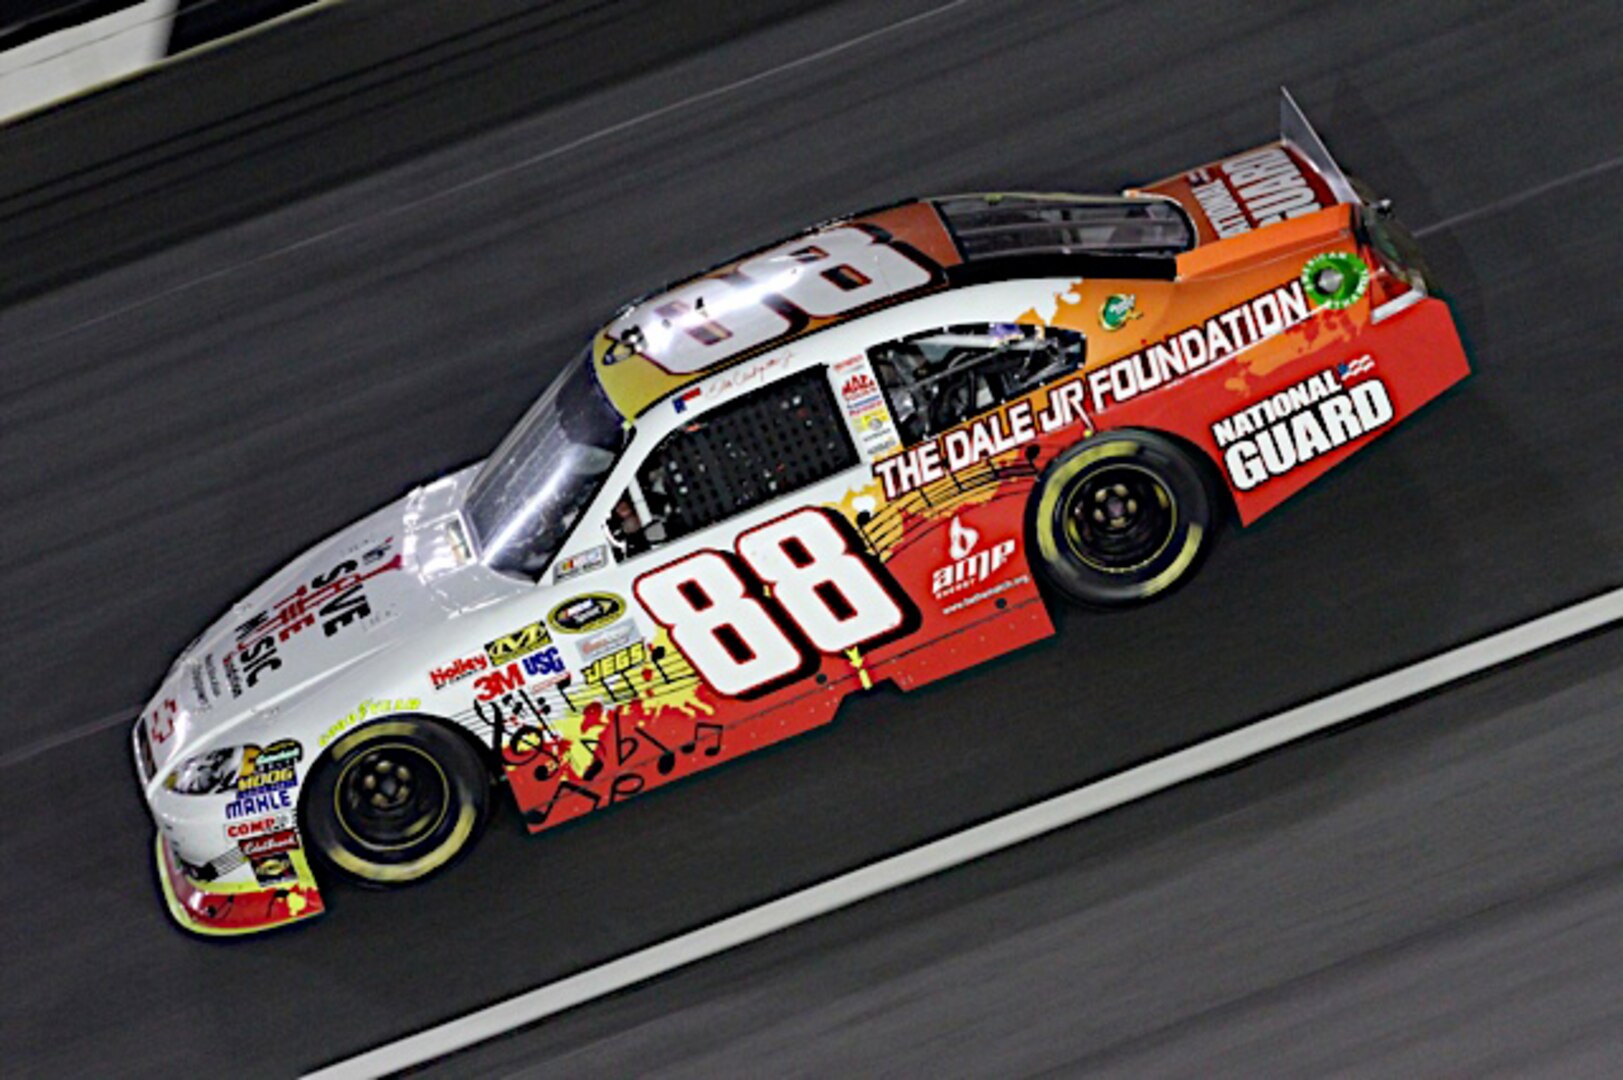 Dale Earnhardt Jr., driver of the No. 88 National Guard NASCAR racecar, races around the track with the Dale Jr. Foundation paint scheme at Charlotte Motor Speedway in Concord, N.C. Jr. was the Sprint Fan Vote of the All-Star race, and finished in 14th. This race did not affect the Sprint Cup series points race.